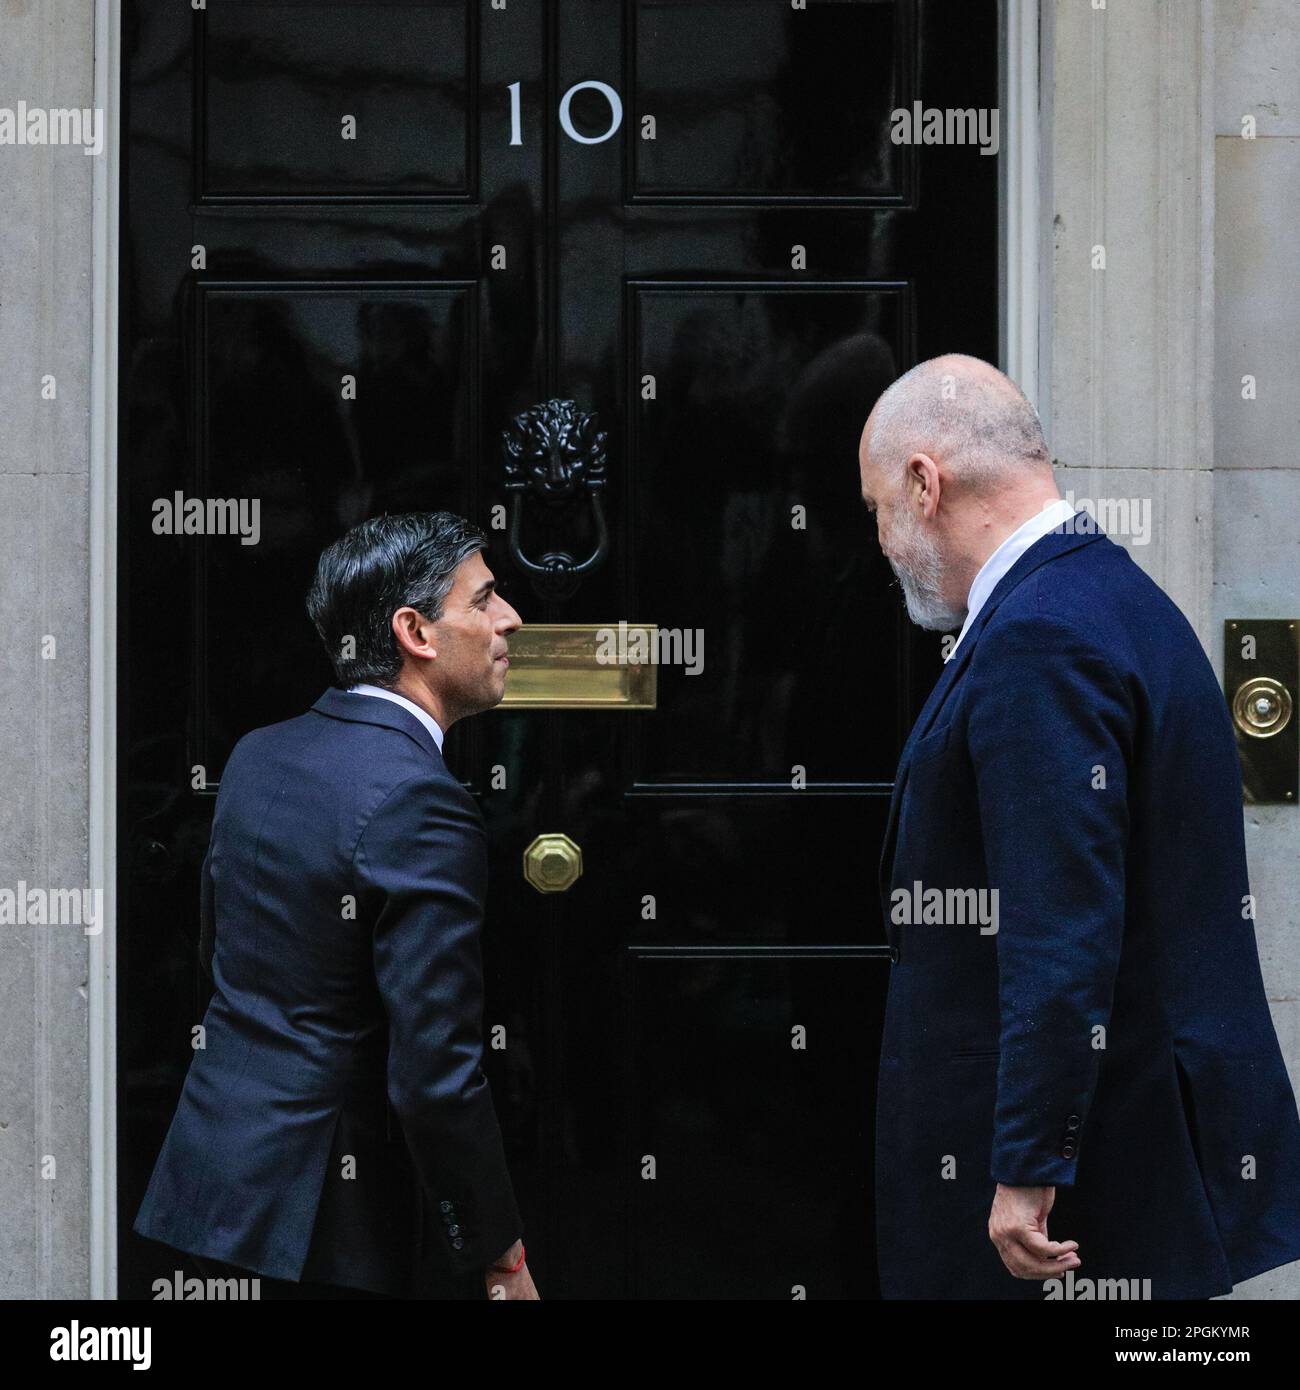 London, UK. 23rd Mar, 2023. Rishi Sunak, MP, Prime Minister of the United Kingdom, welcomes Edi Rama, Prime Minister of Albania, at 10 Downing Street in Westminster today. Rama, Albanian PM since 2013 and head of the Socialist Party of Albania had recently criticised Home Secretary Suella Braverman over her comments regarding Albanian migrants. Credit: Imageplotter/Alamy Live News Stock Photo